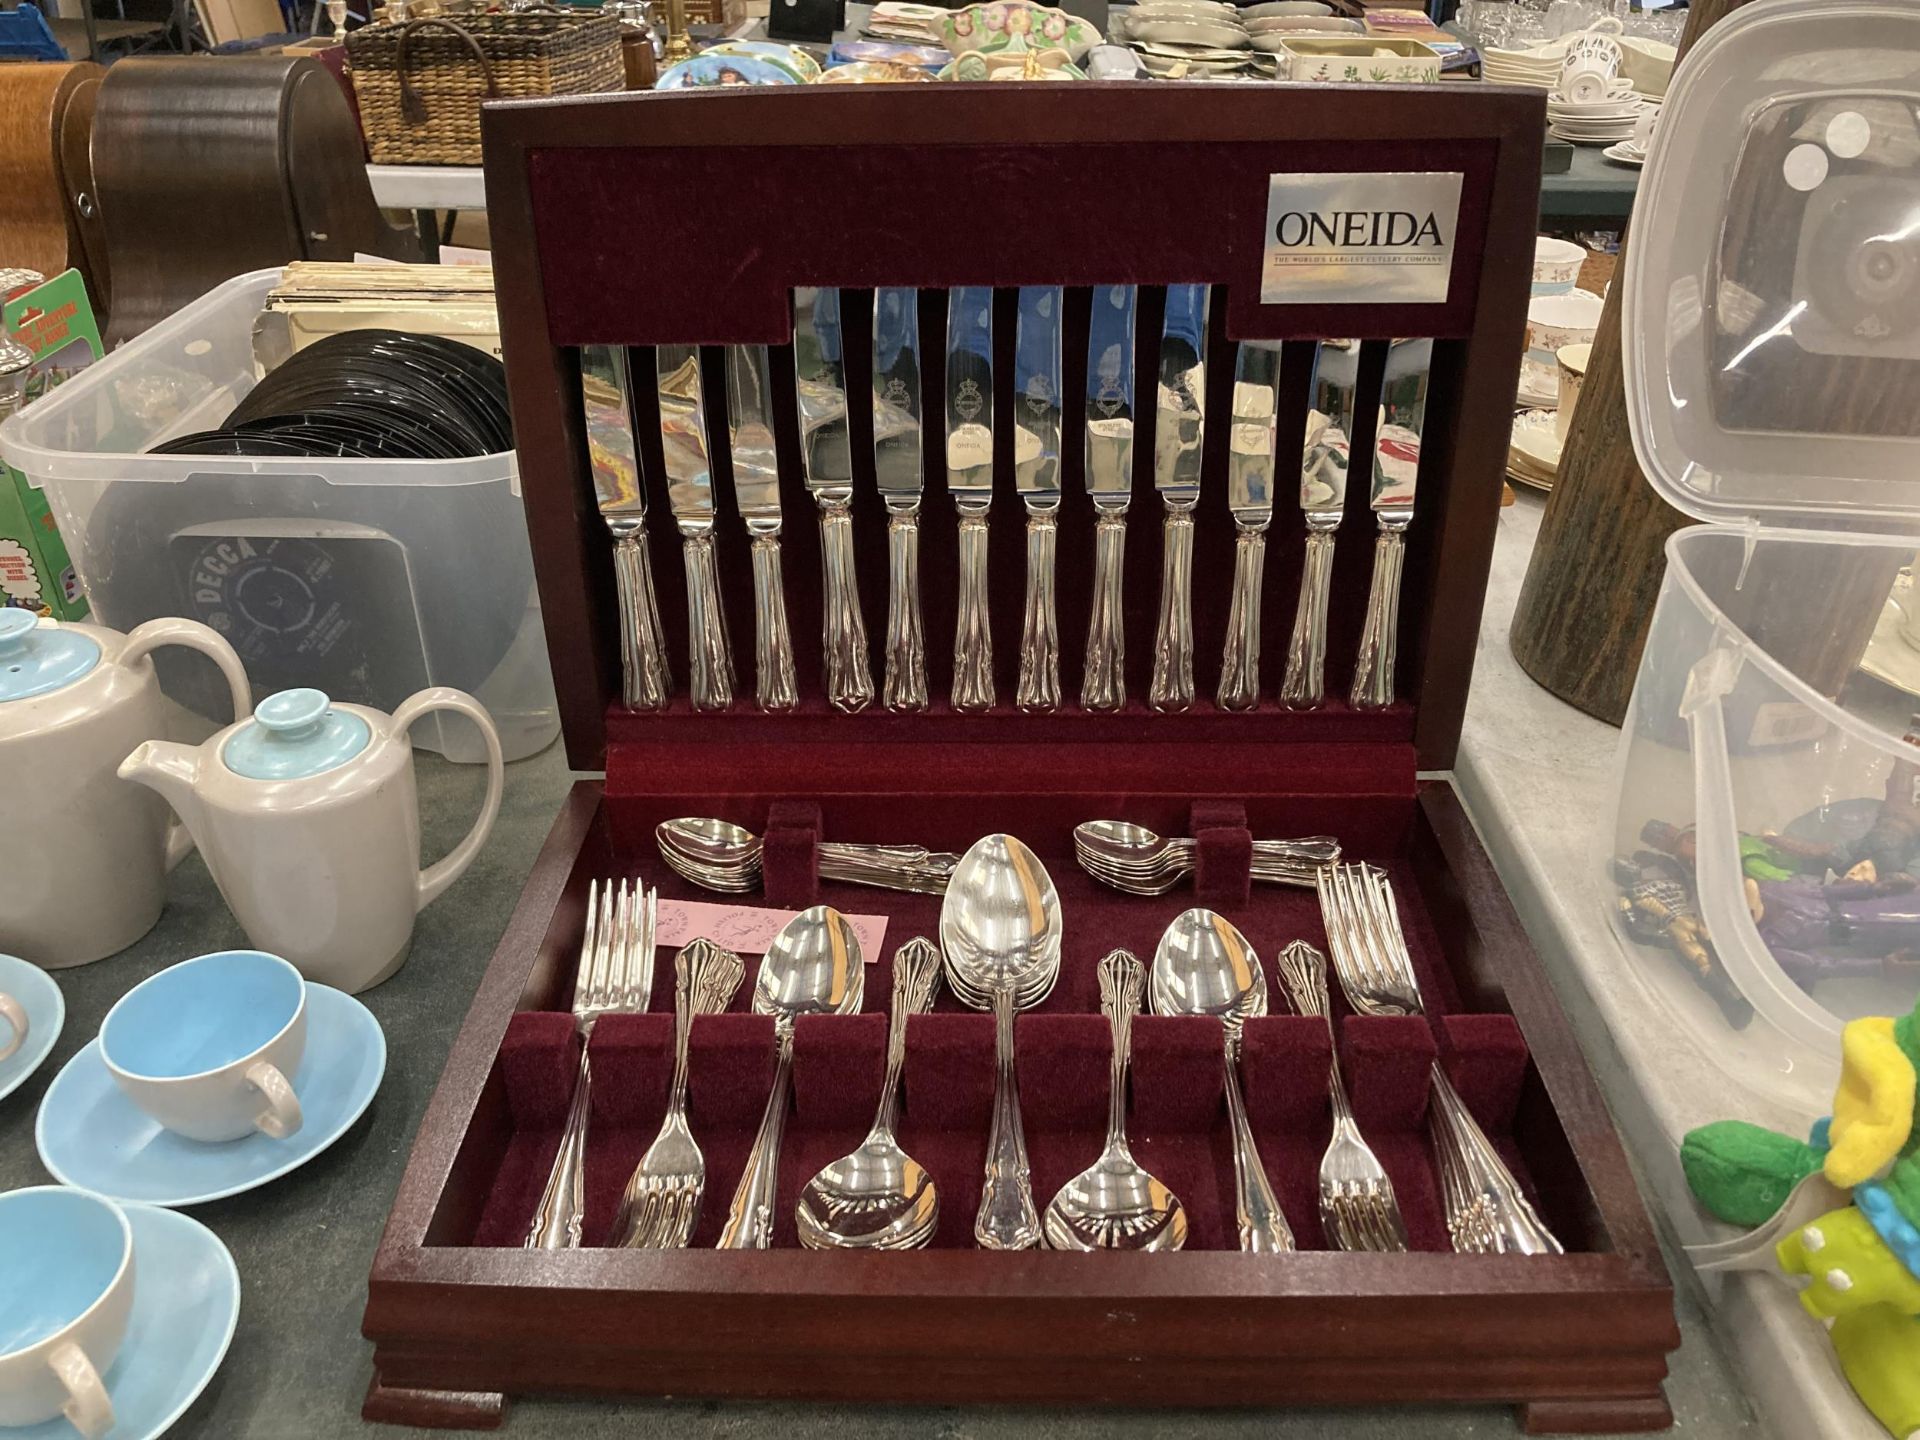 AN ONEIDA CANTEEN OF CUTLERY IN A WOODEN BOX